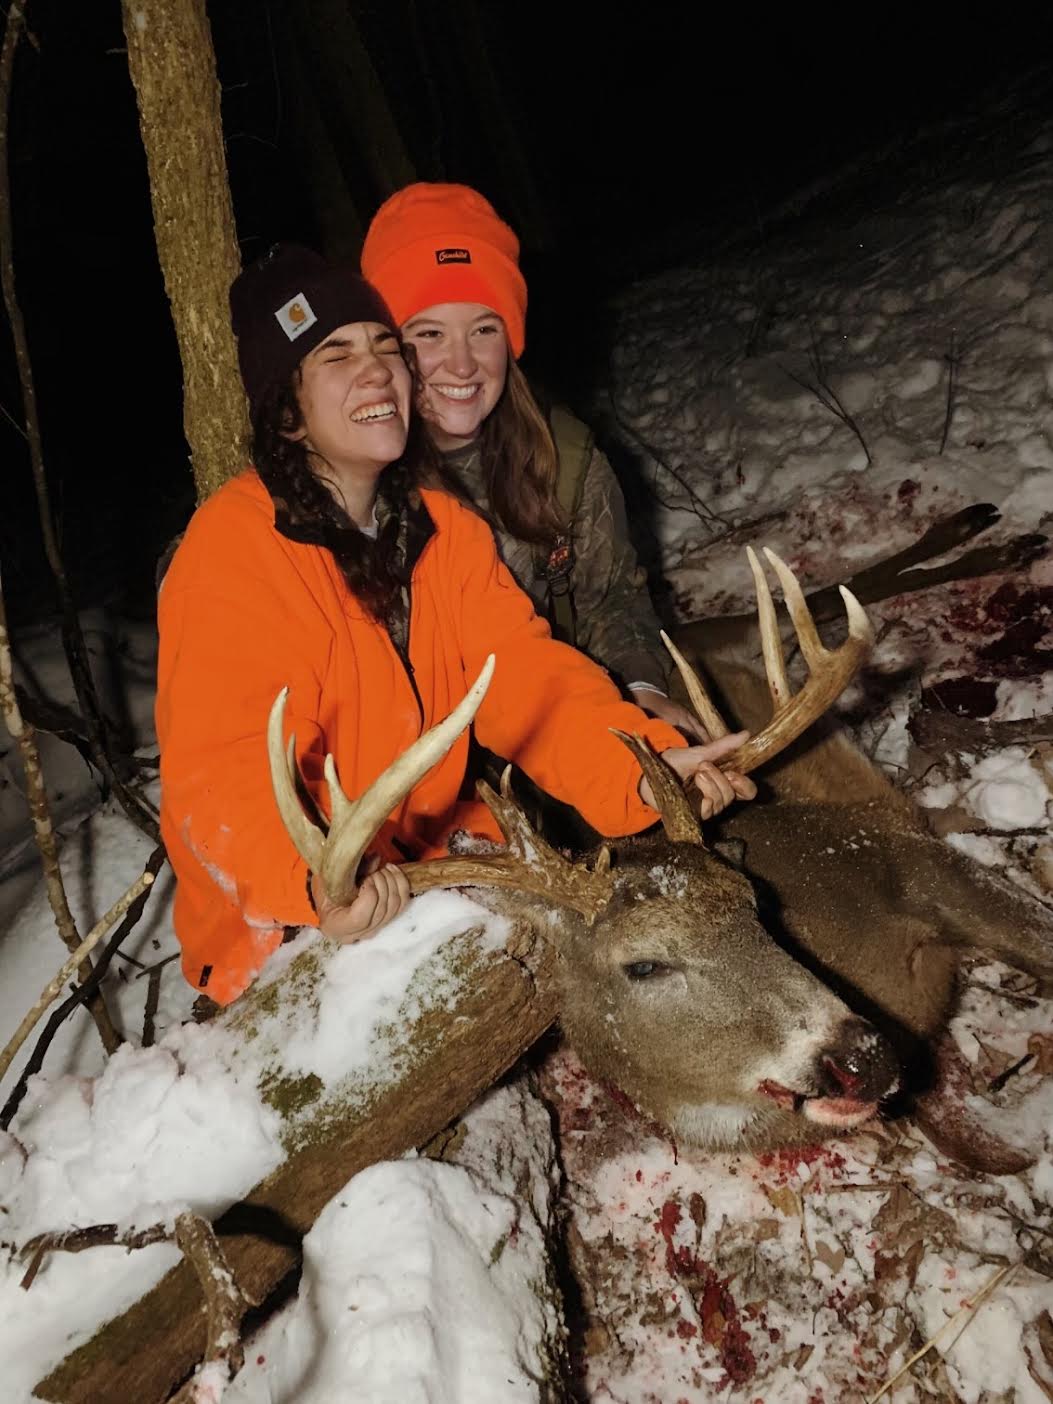 Tears of joy for a great buck that was well-earned. Greta with some help from her cousin CeCe Johnson are overcome with joy.